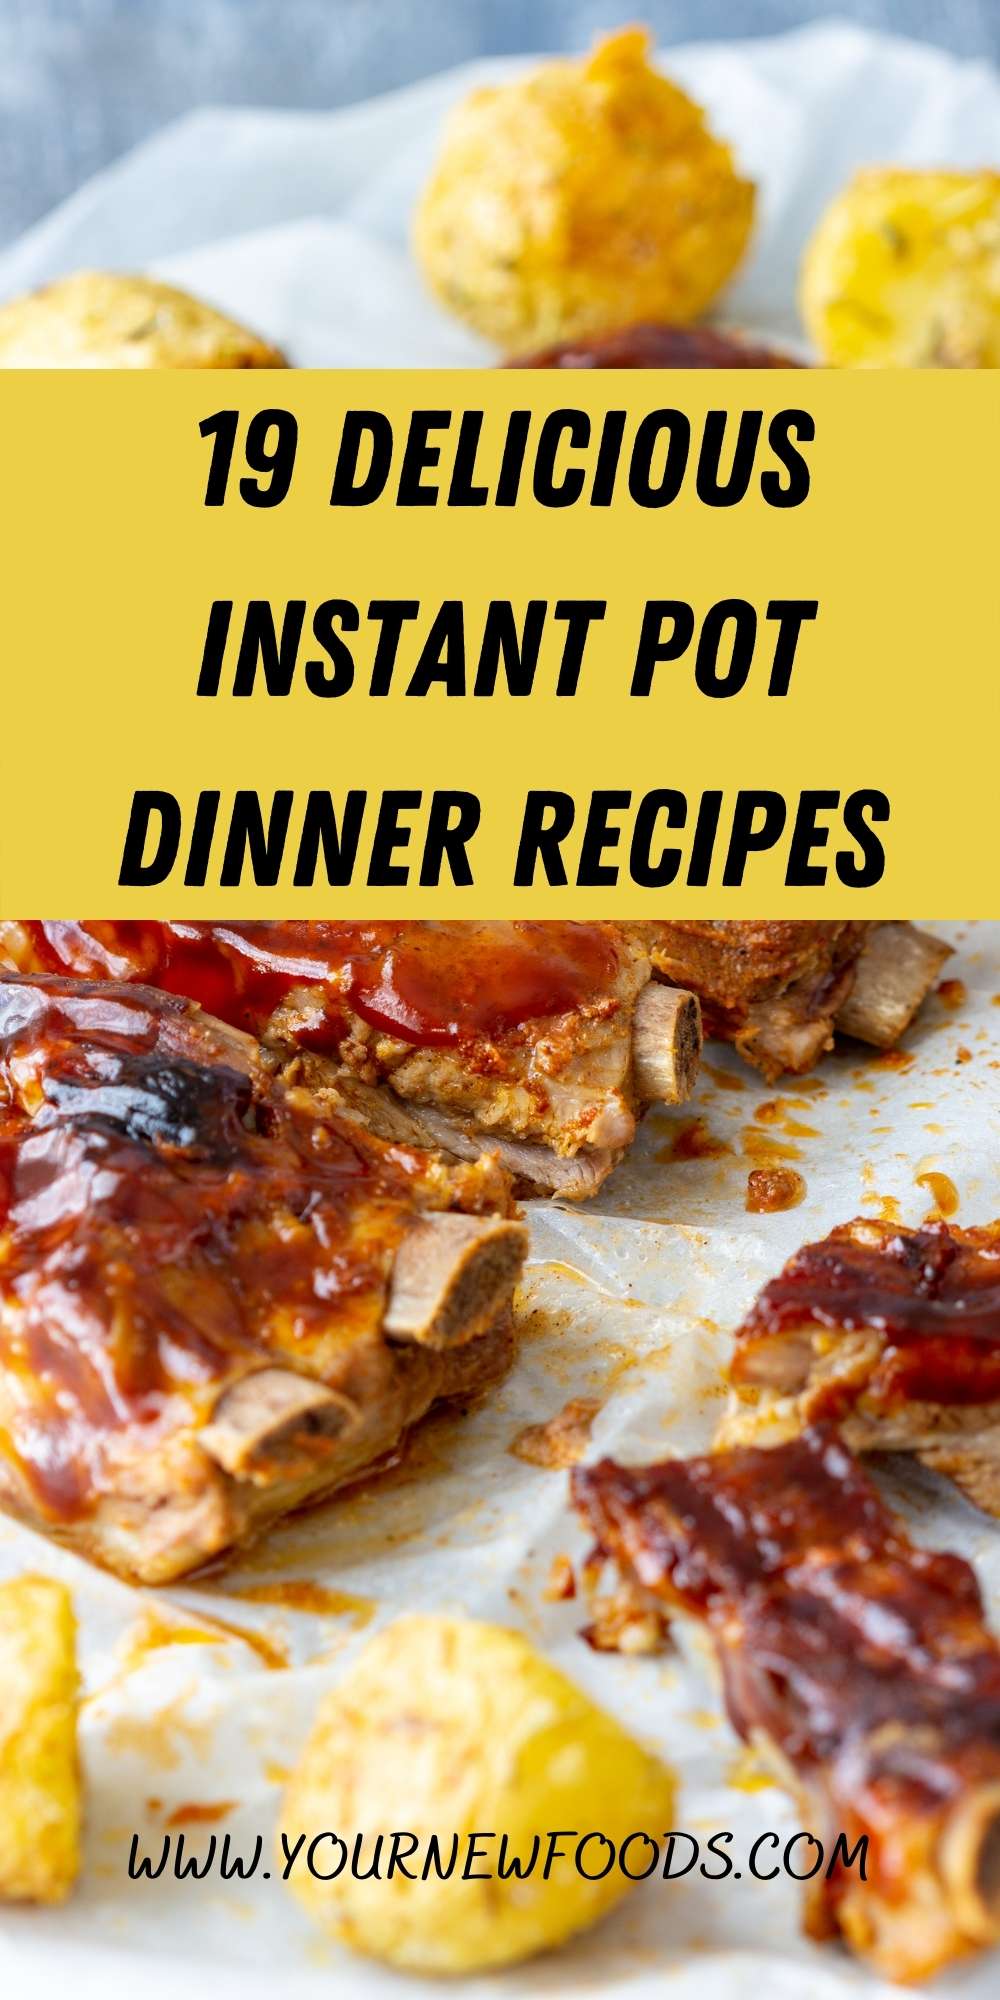 Instant Pot Dinners - 19 of the most popular recipes